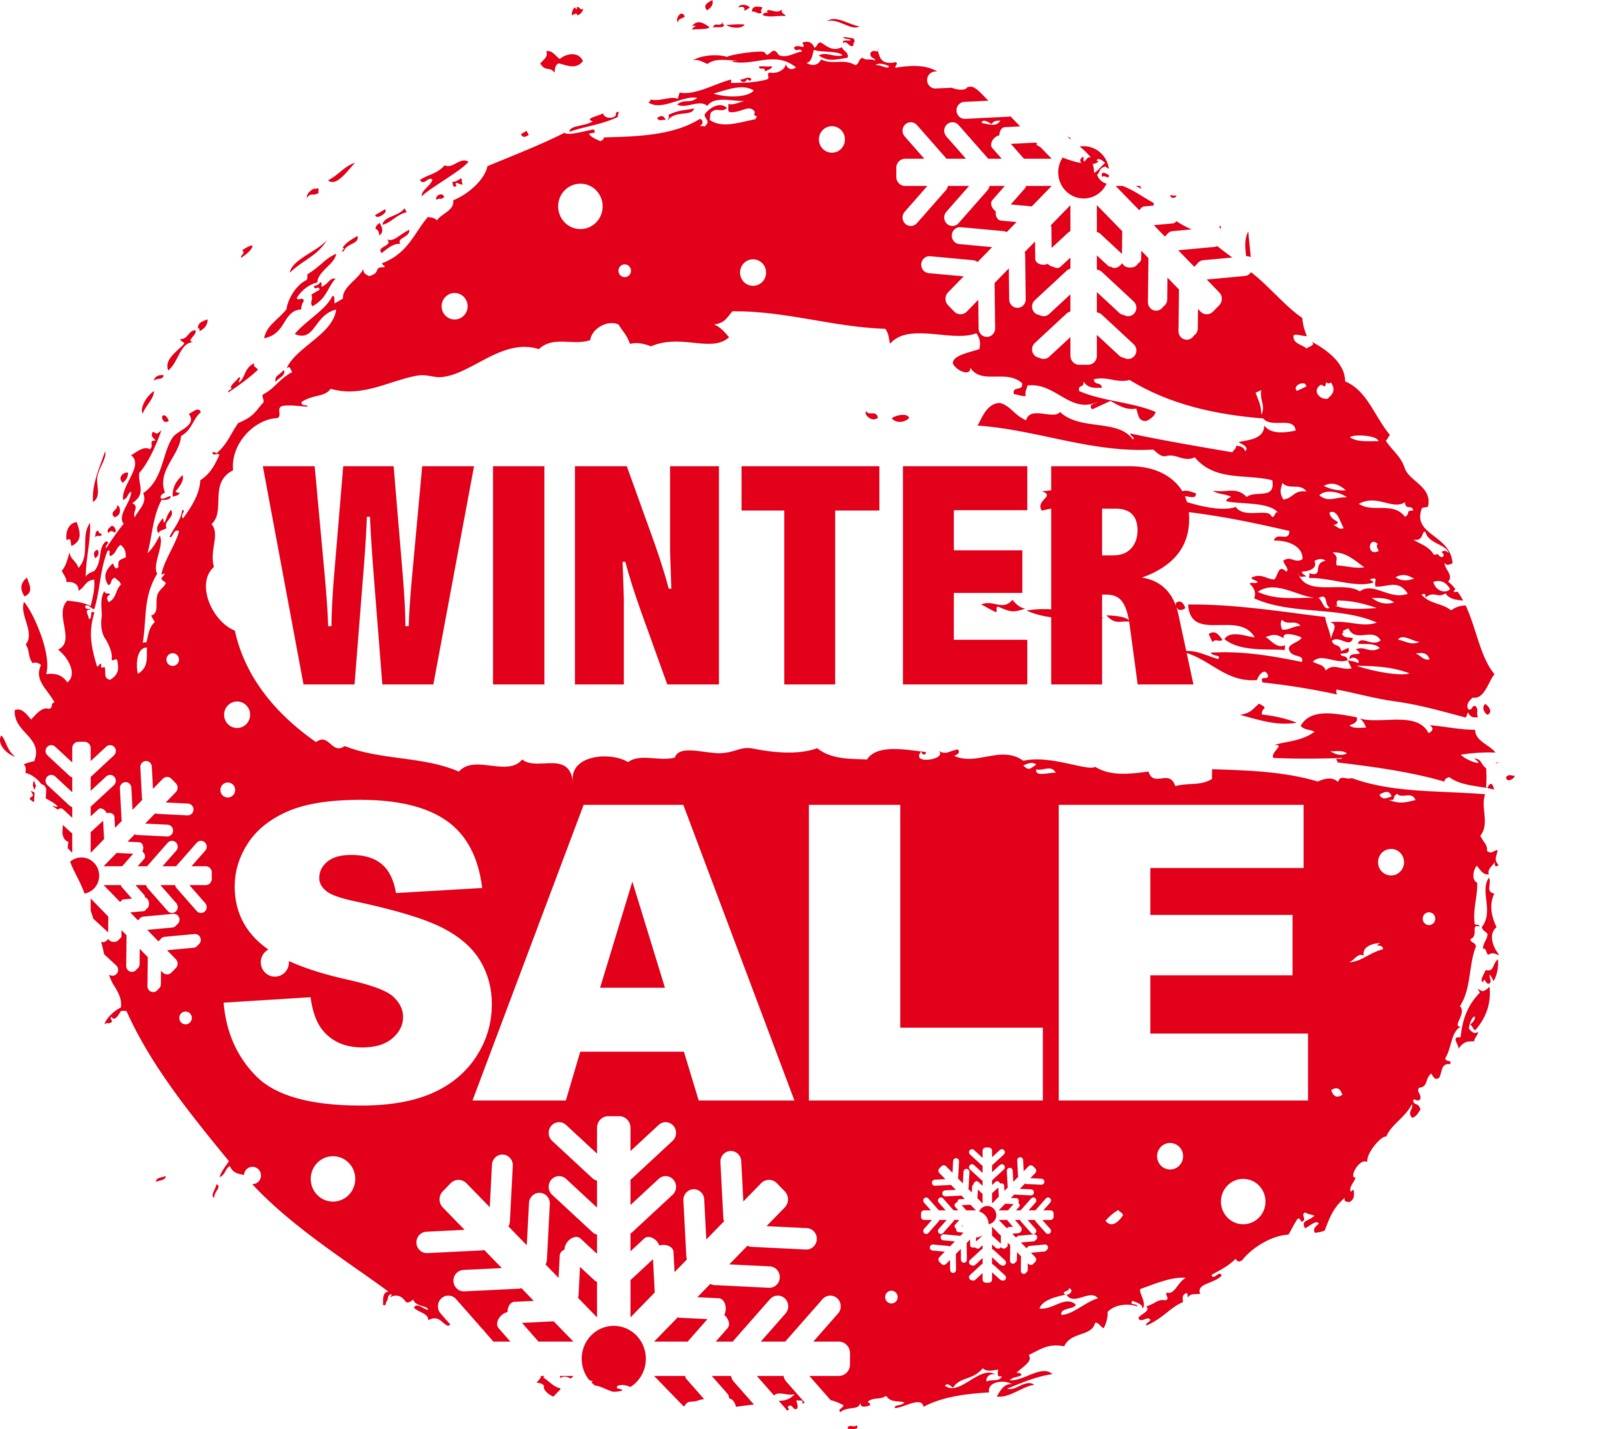 Winter Sale by barbaliss